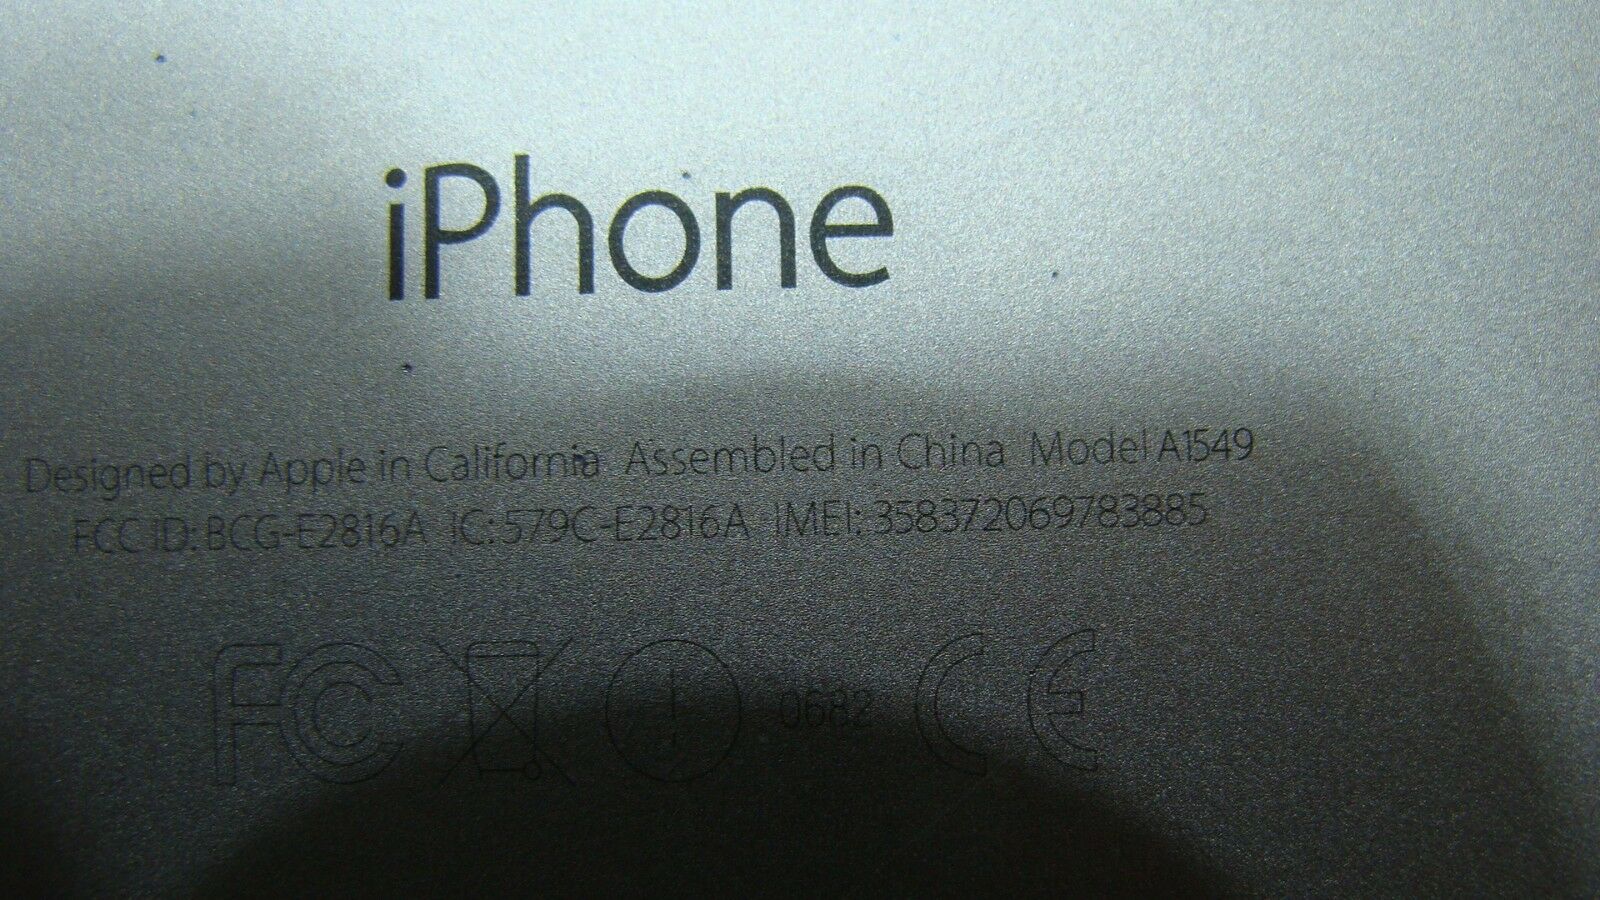 iPhone 6 AT&T A1549 4.7